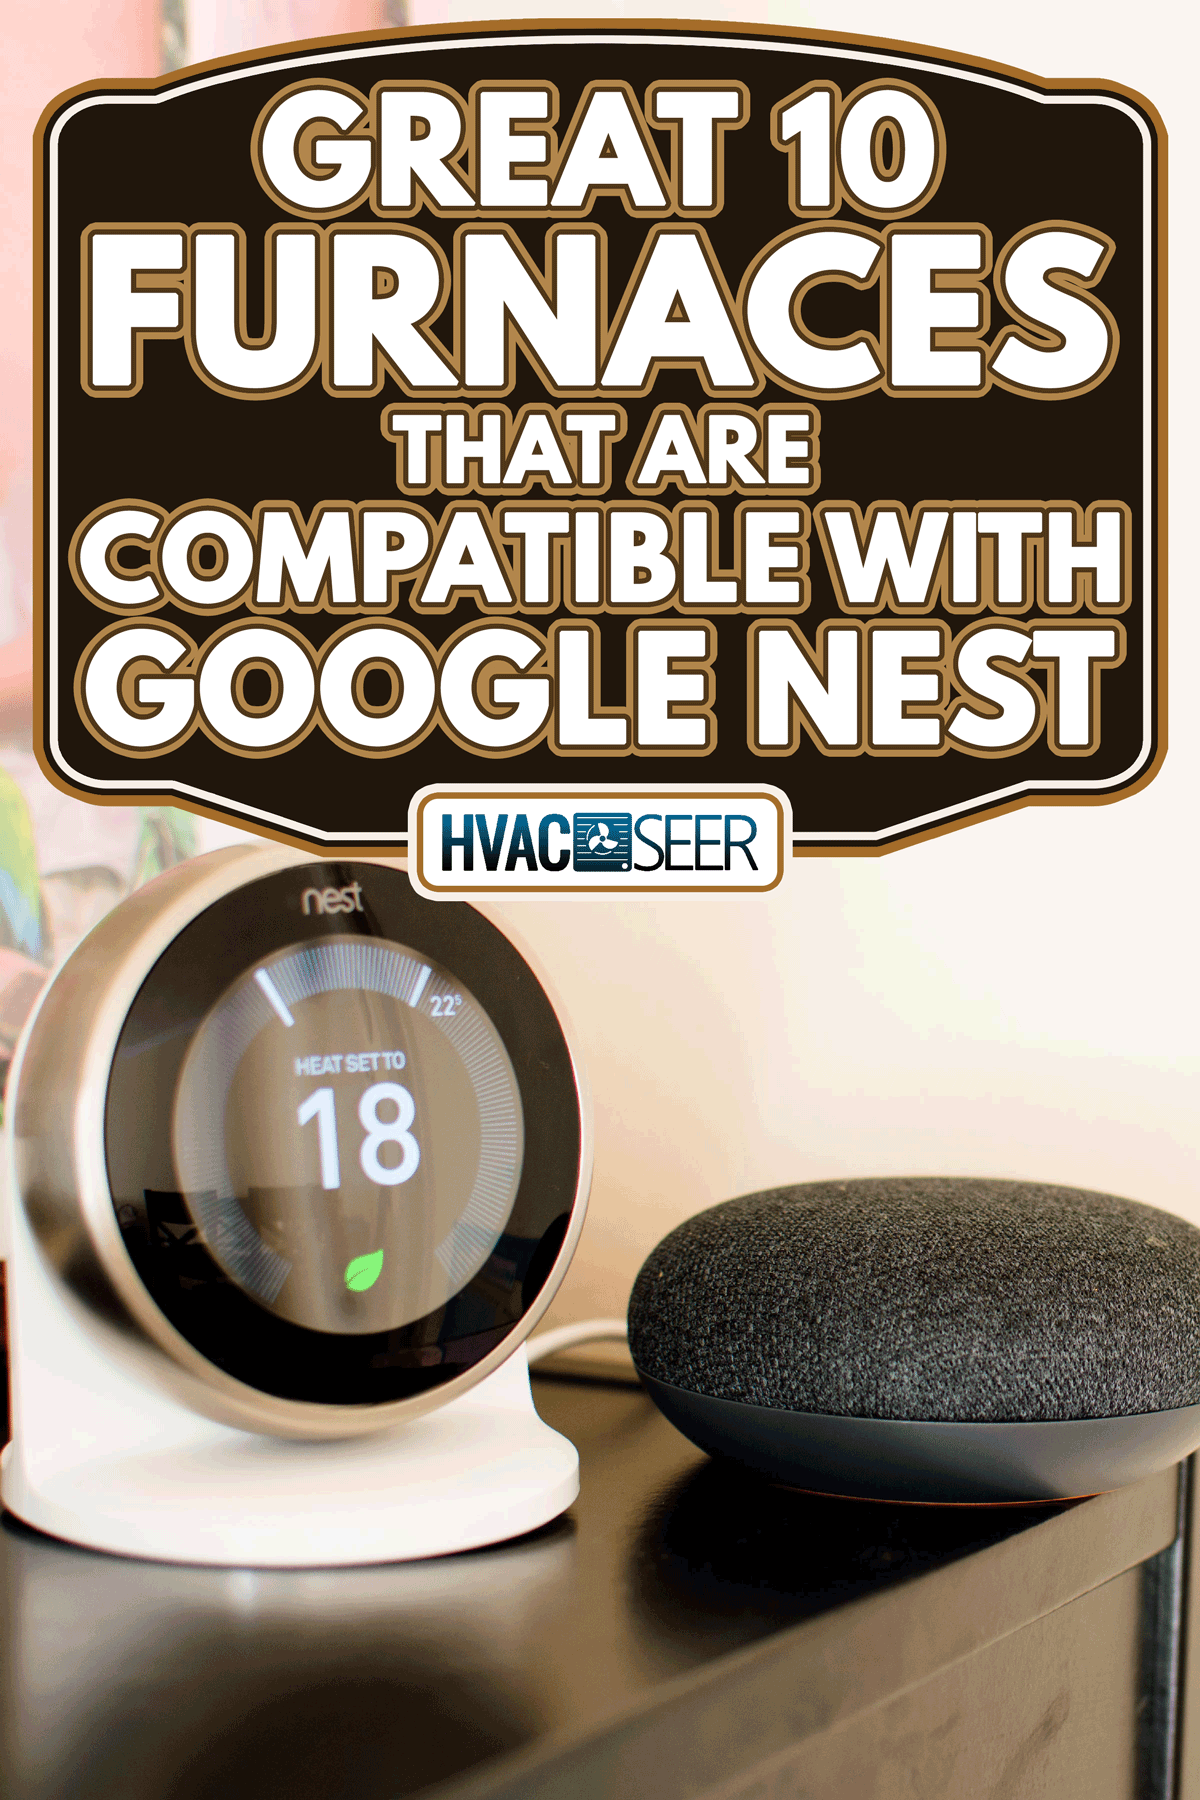 A Nest Learning Thermostat 3rd generation integrates with smart home technologies, 10 Great Furnaces That Are Compatible With Google Nest